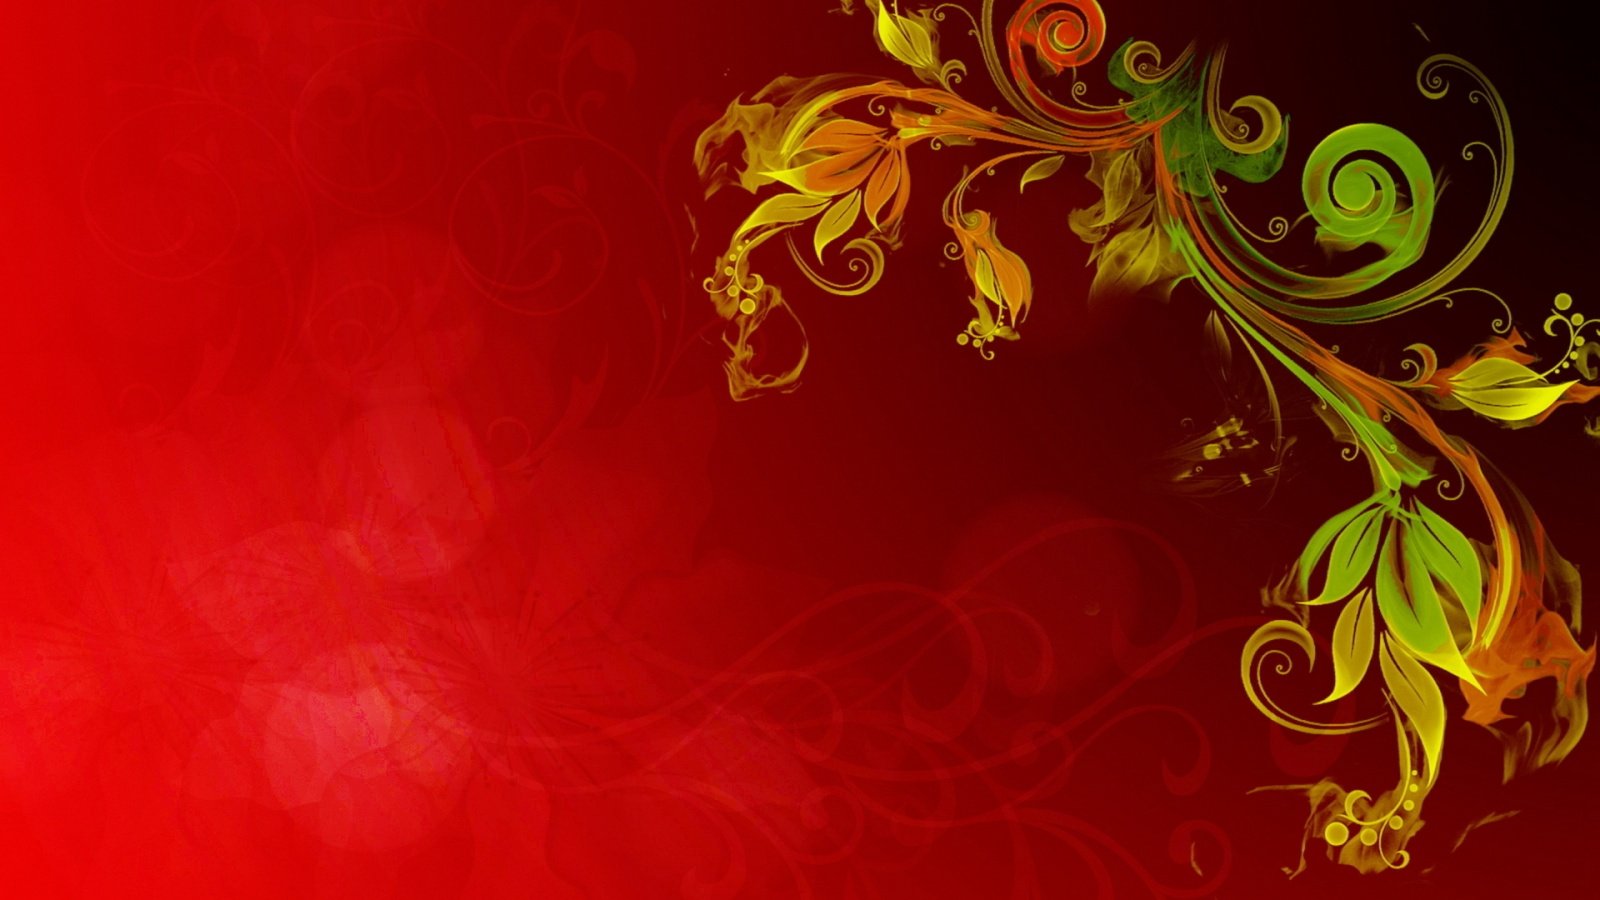 Abstract Swirls Windows 81 Theme And Wallpaper All For Windows 10 1600x900